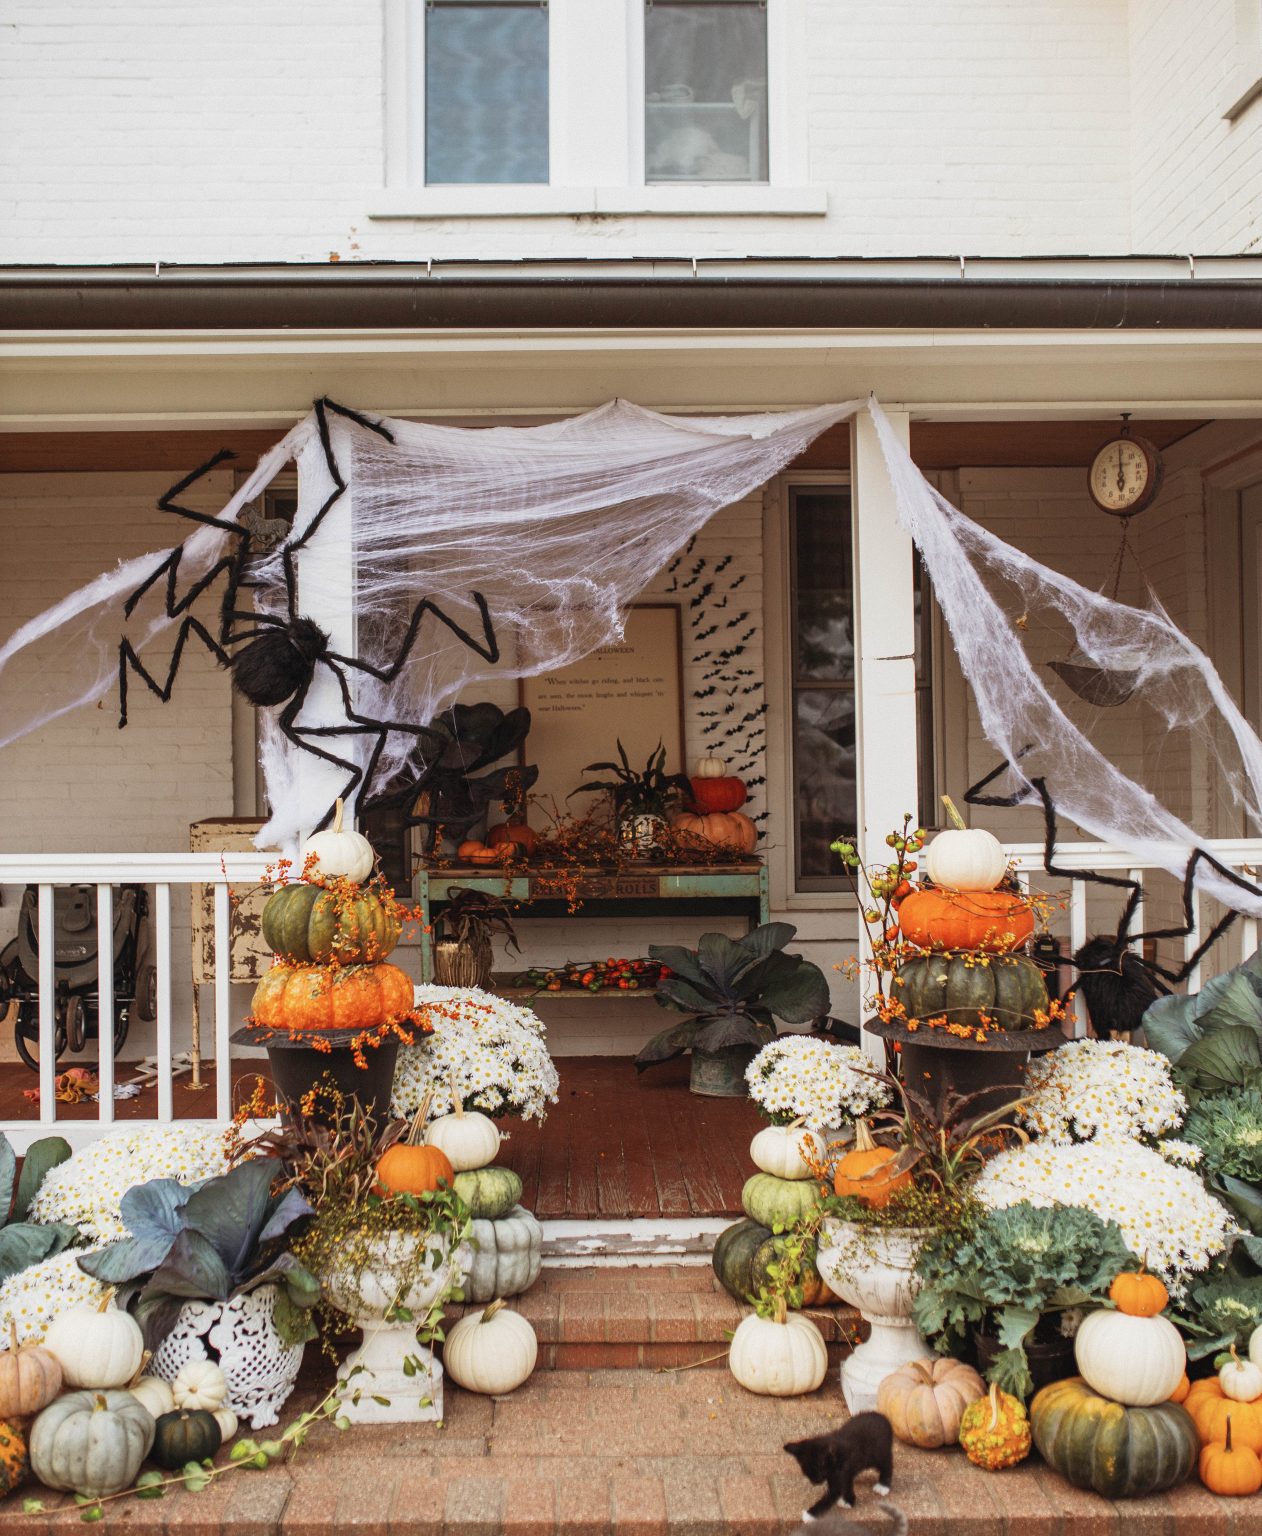 Spooky Fall Front Porch - Abigail Albers spooky halloween